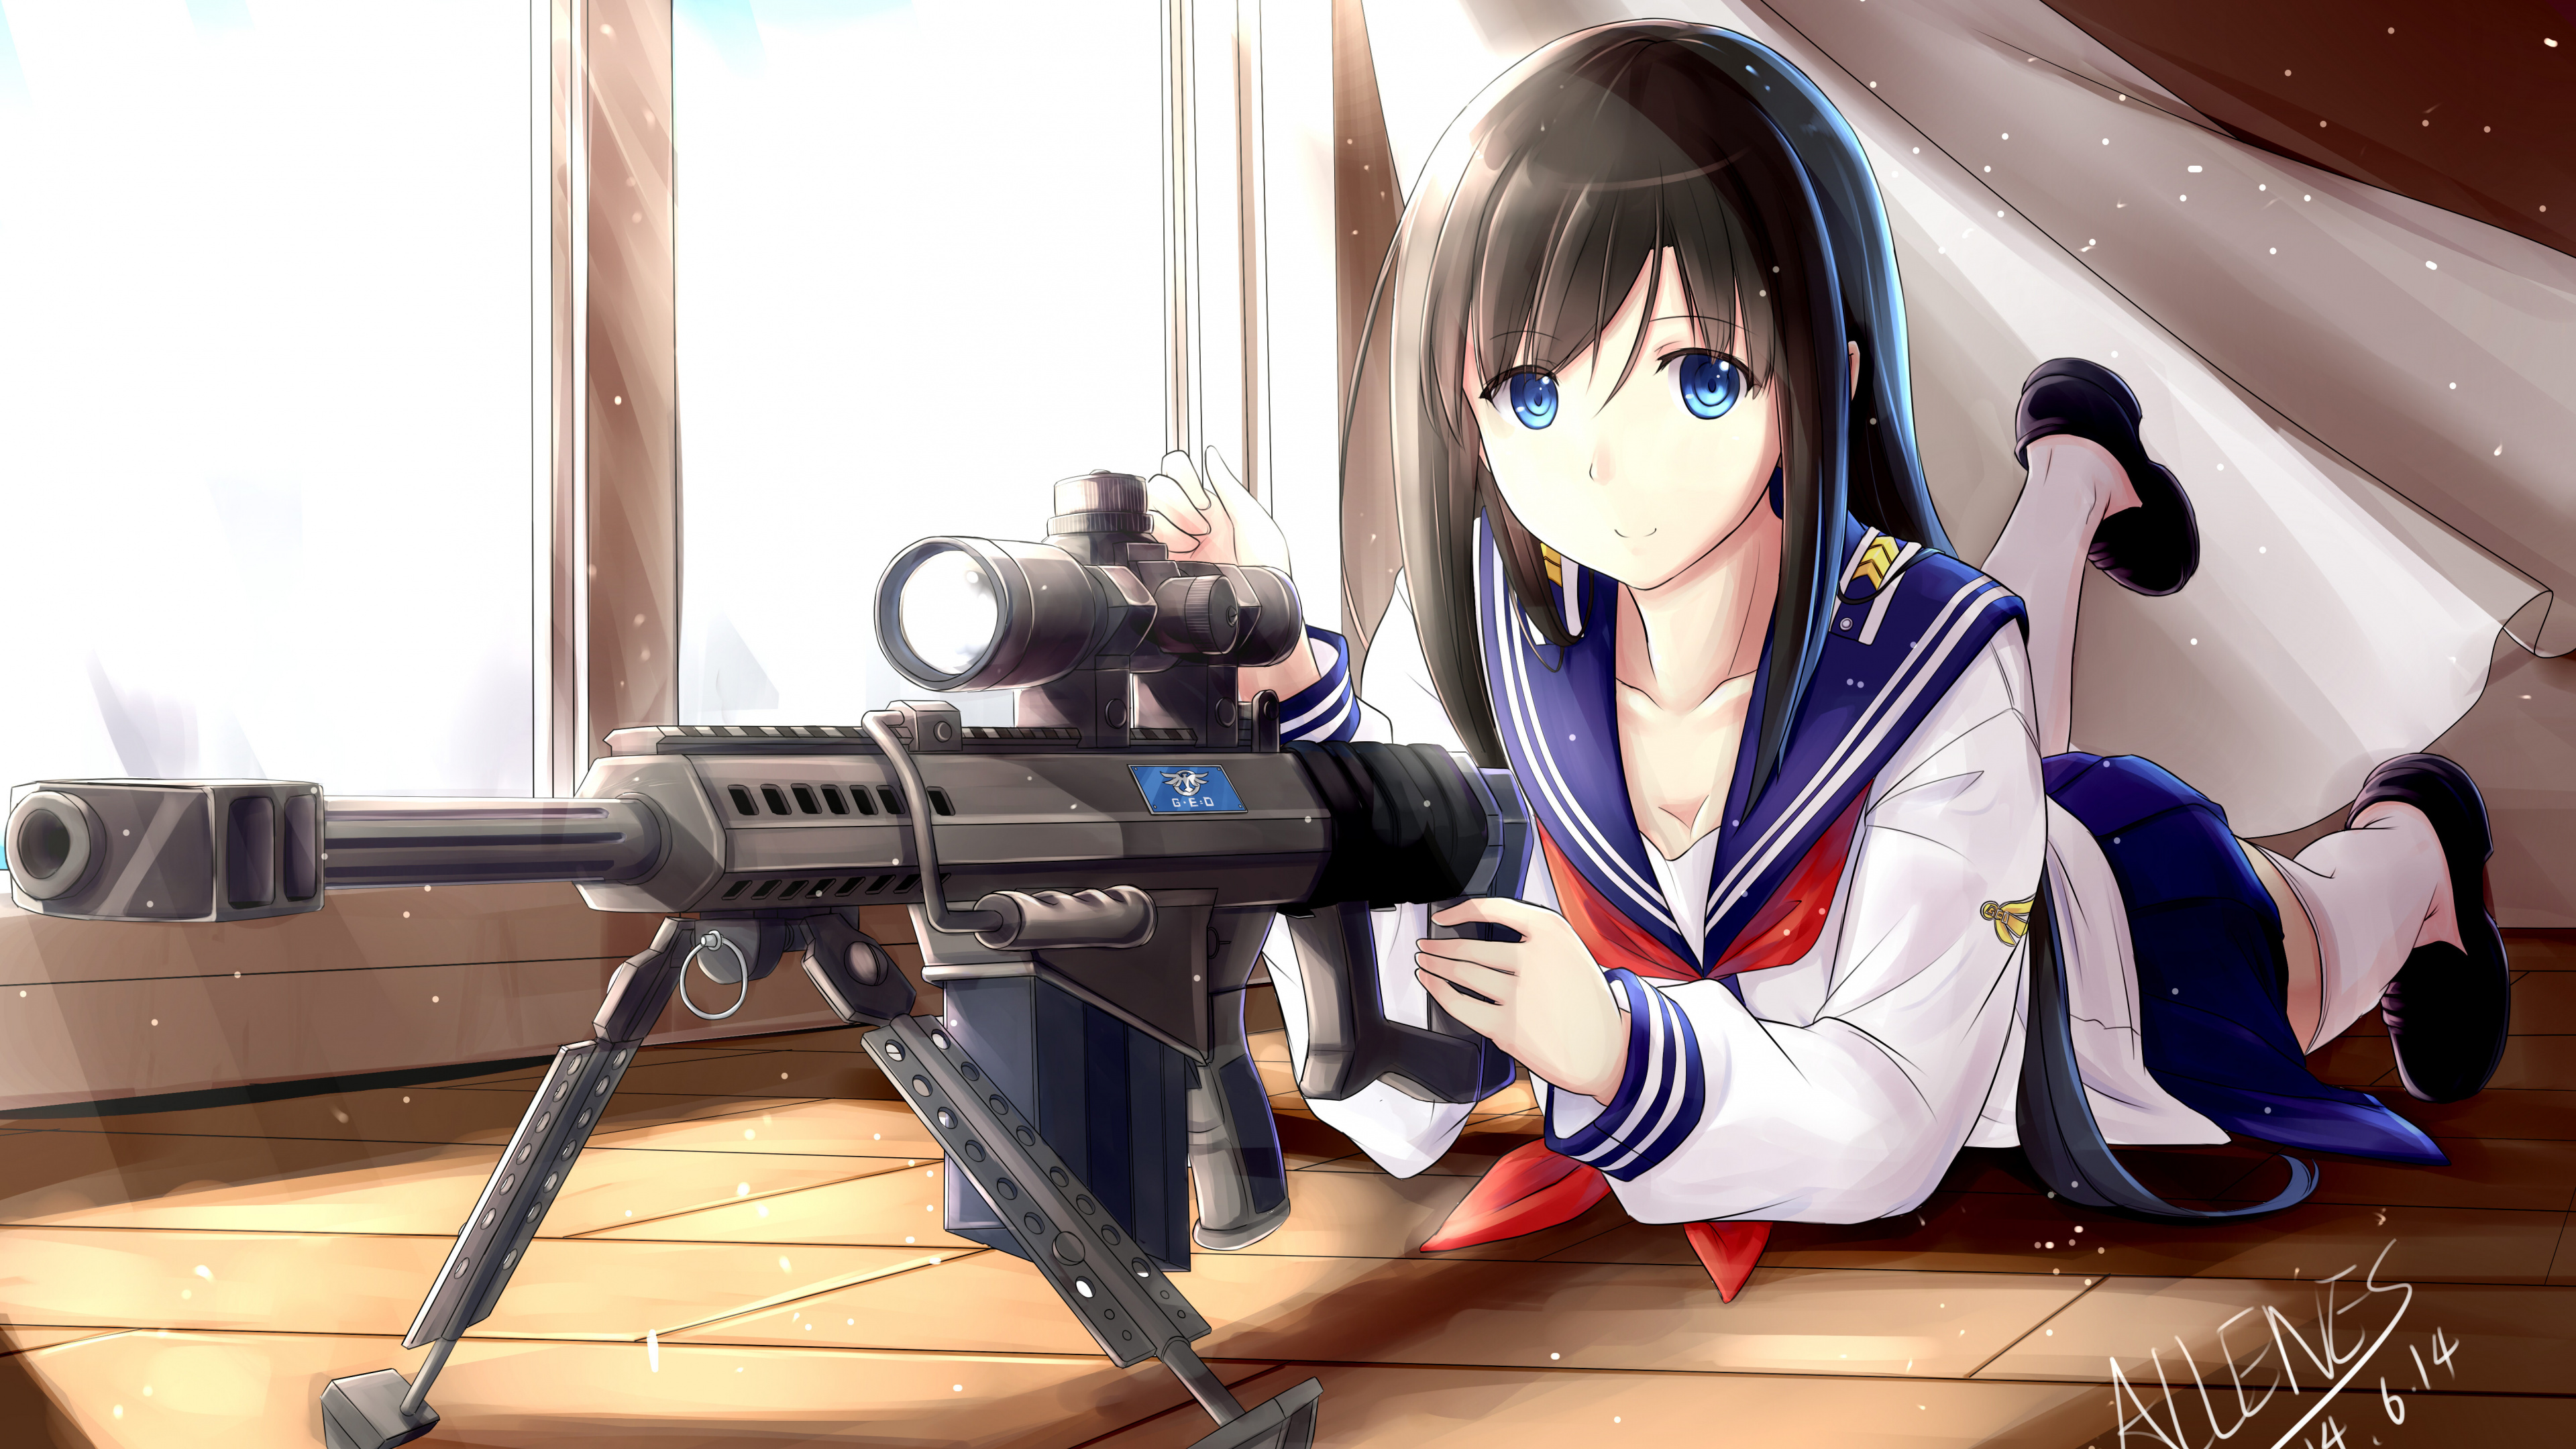 Woman in White and Blue Jacket Holding Black Rifle. Wallpaper in 3840x2160 Resolution